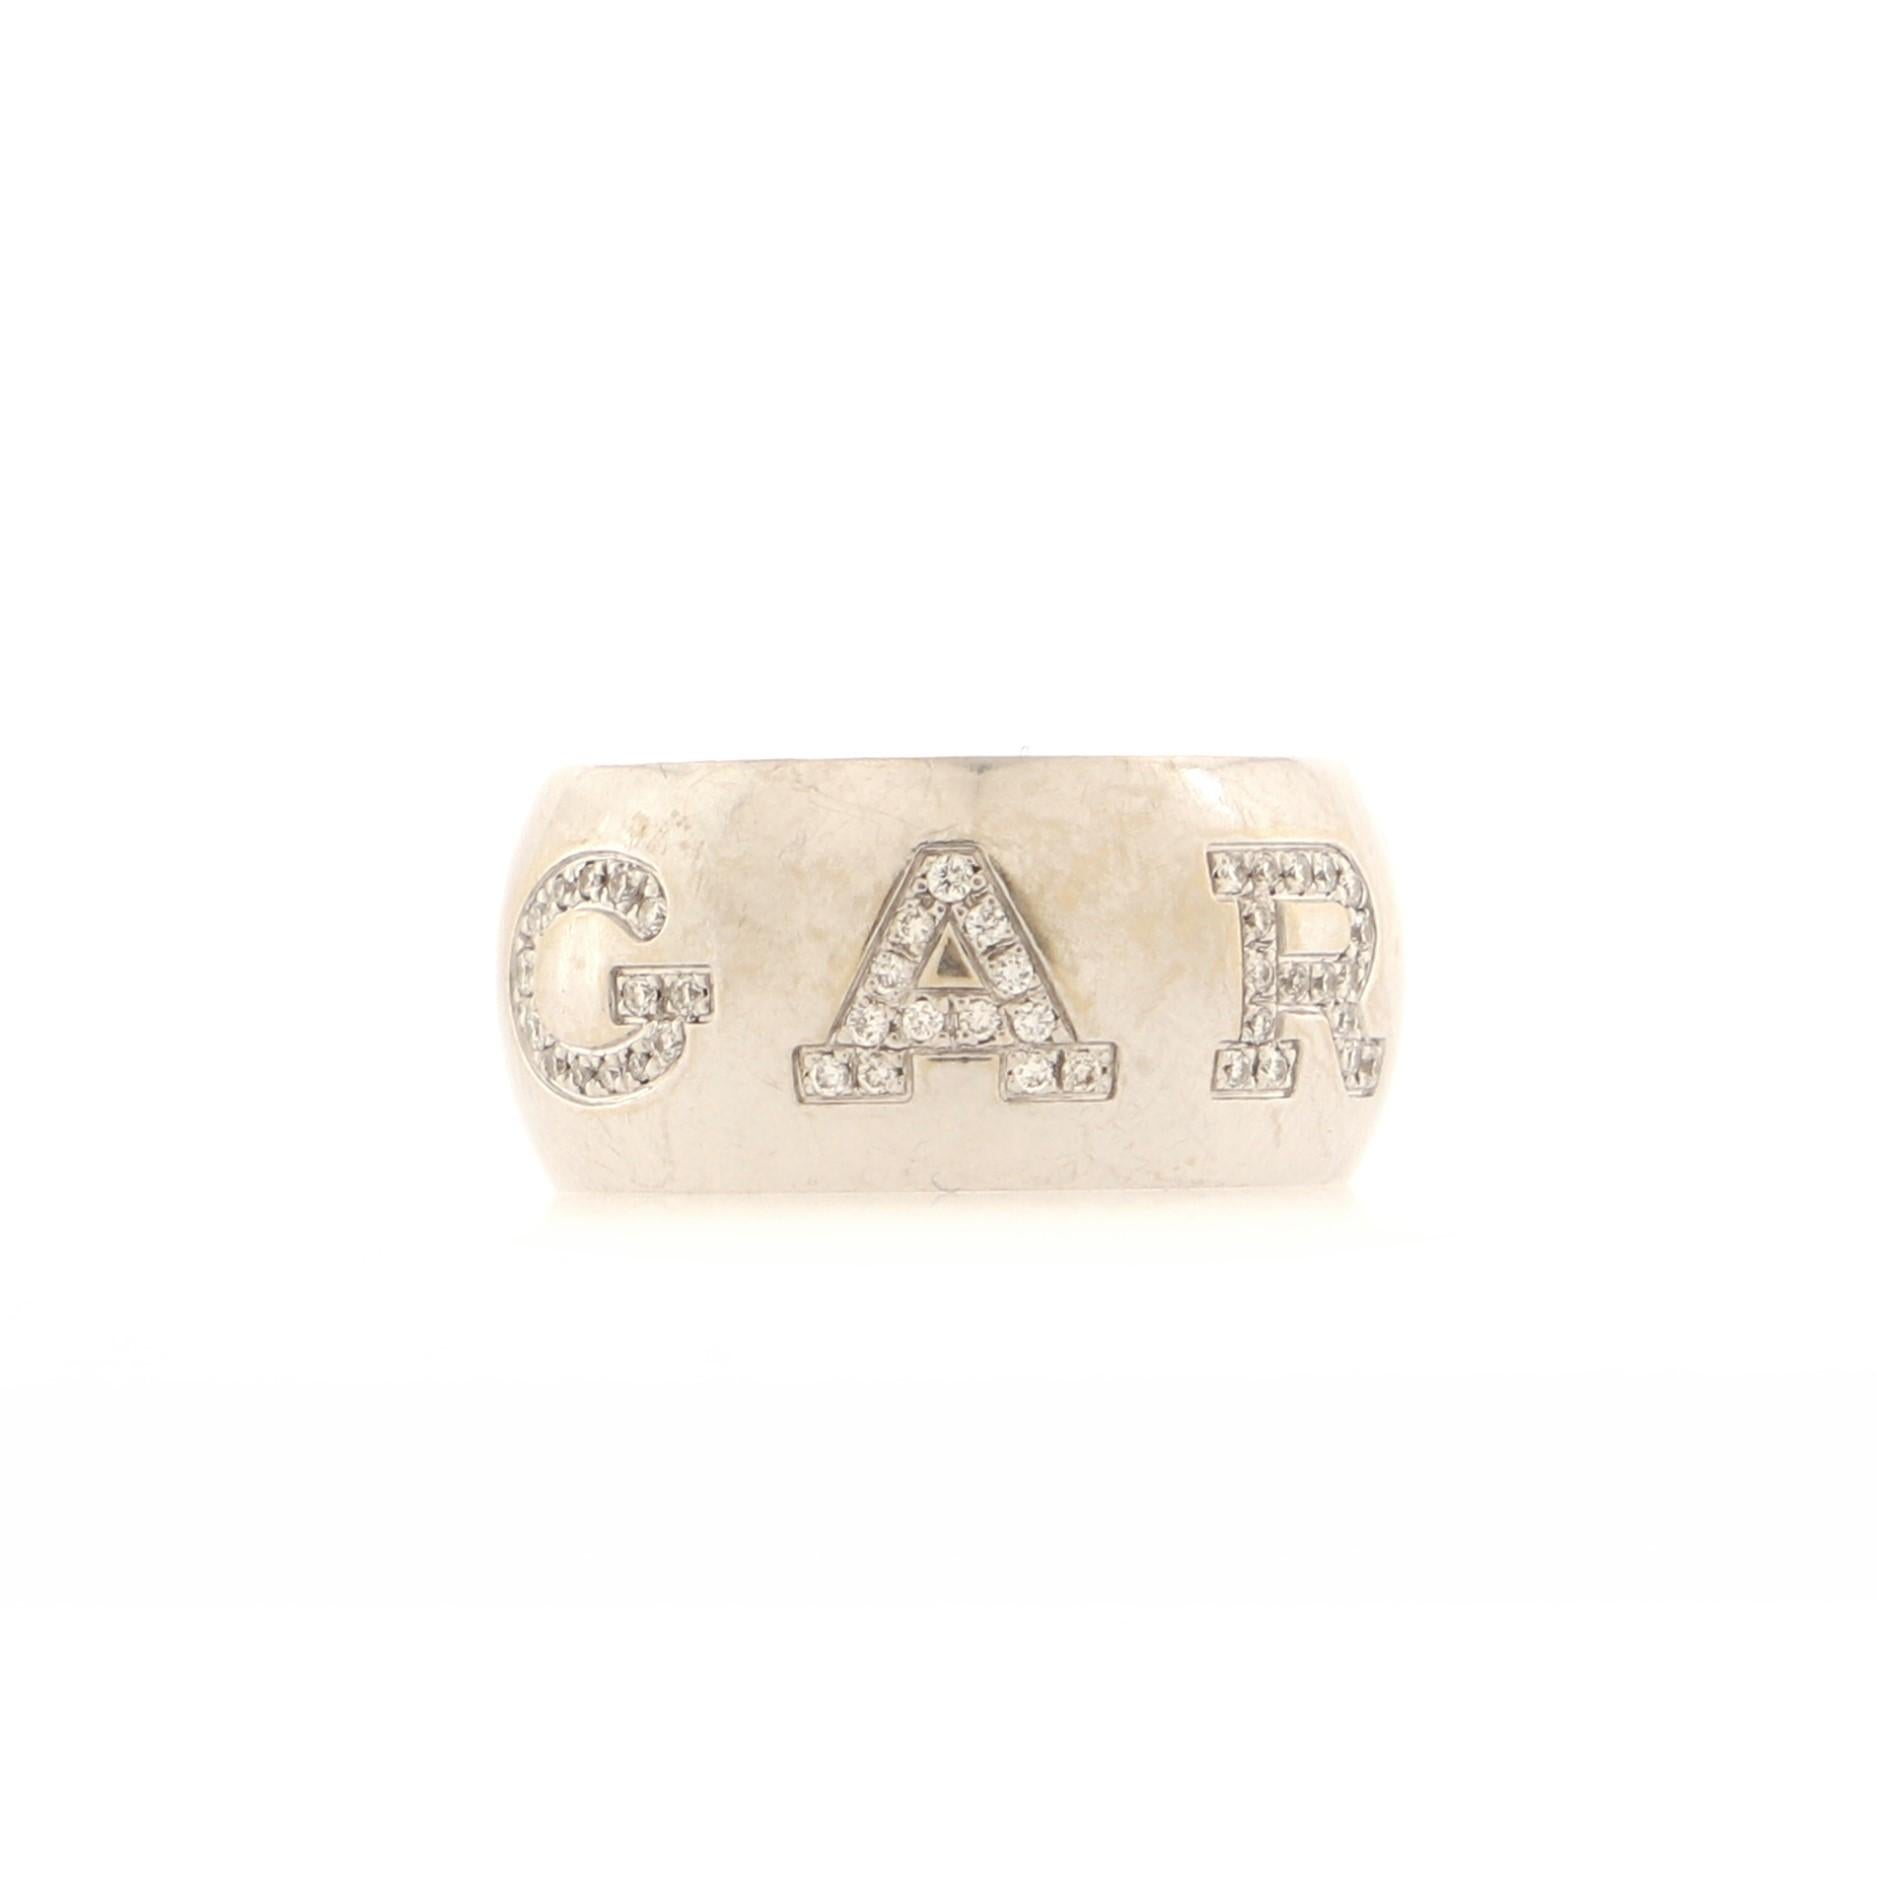 Condition: Fair. Heavy scratches throughout with one diamond missing.
Accessories: No Accessories
Measurements: Size: 7.25 - 55, Width: 10.00 mm
Designer: Bvlgari
Model: Monologo Ring 18K White Gold with Diamonds
Exterior Color: White Gold
Item